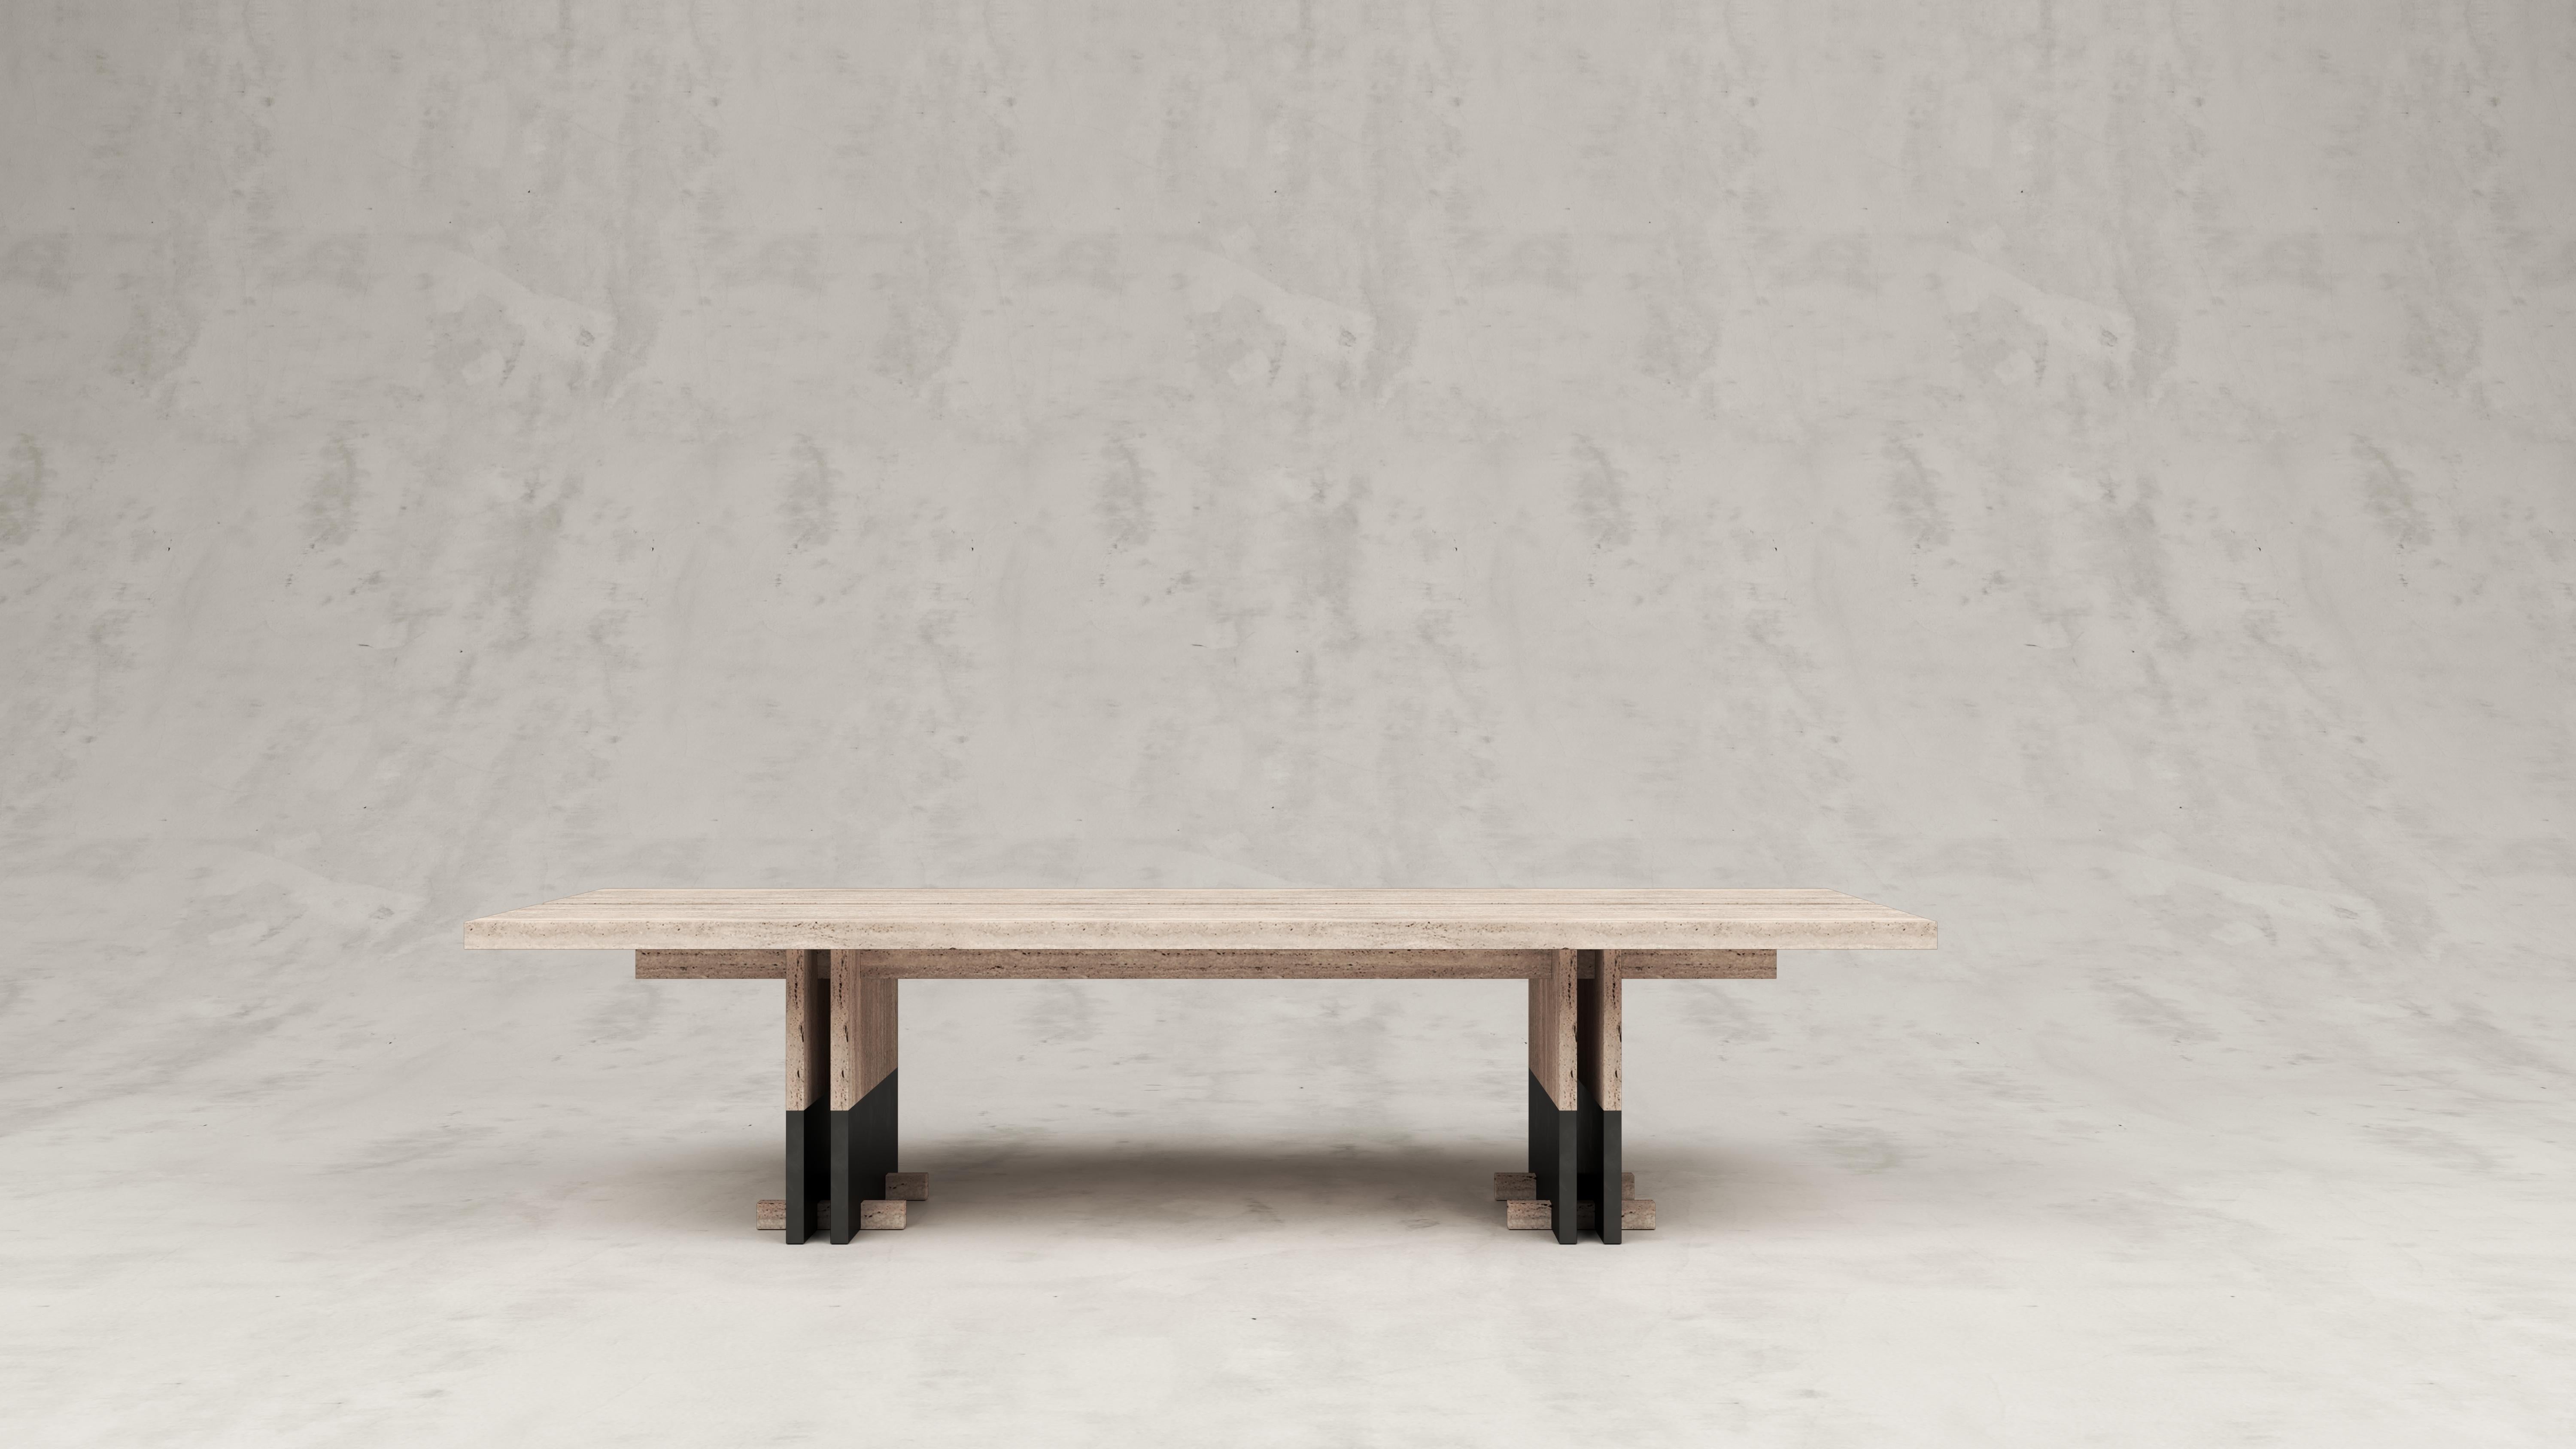 Rift travertino Gririo dining table with little feet by Andy Kerstens
Dimensions: W 240 x D 98 x H 74 cm
Materials: Travertino Gririo, Steel
Optional little feet at table legs.
Handmade in Belgium.

Available in Solid Larch, Oak and Walnut and